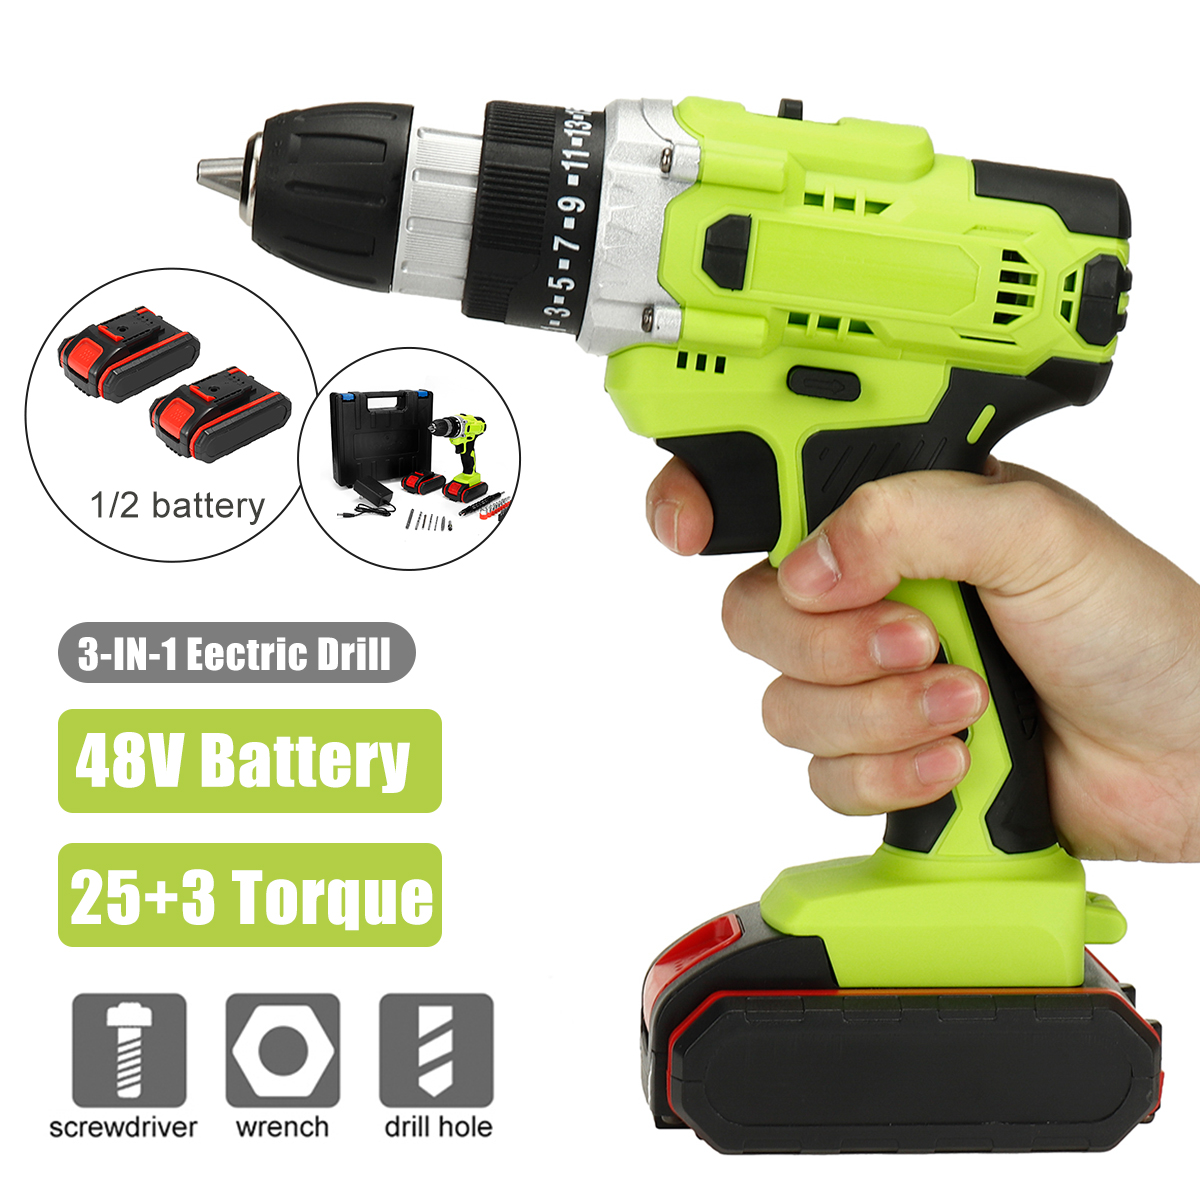 3-in-1-Multifunctional-Cordless-Electric-Drill-48VF-253-38-Inch-Chuck-Impact-Drill-W-12pcs-Battery-1839461-1